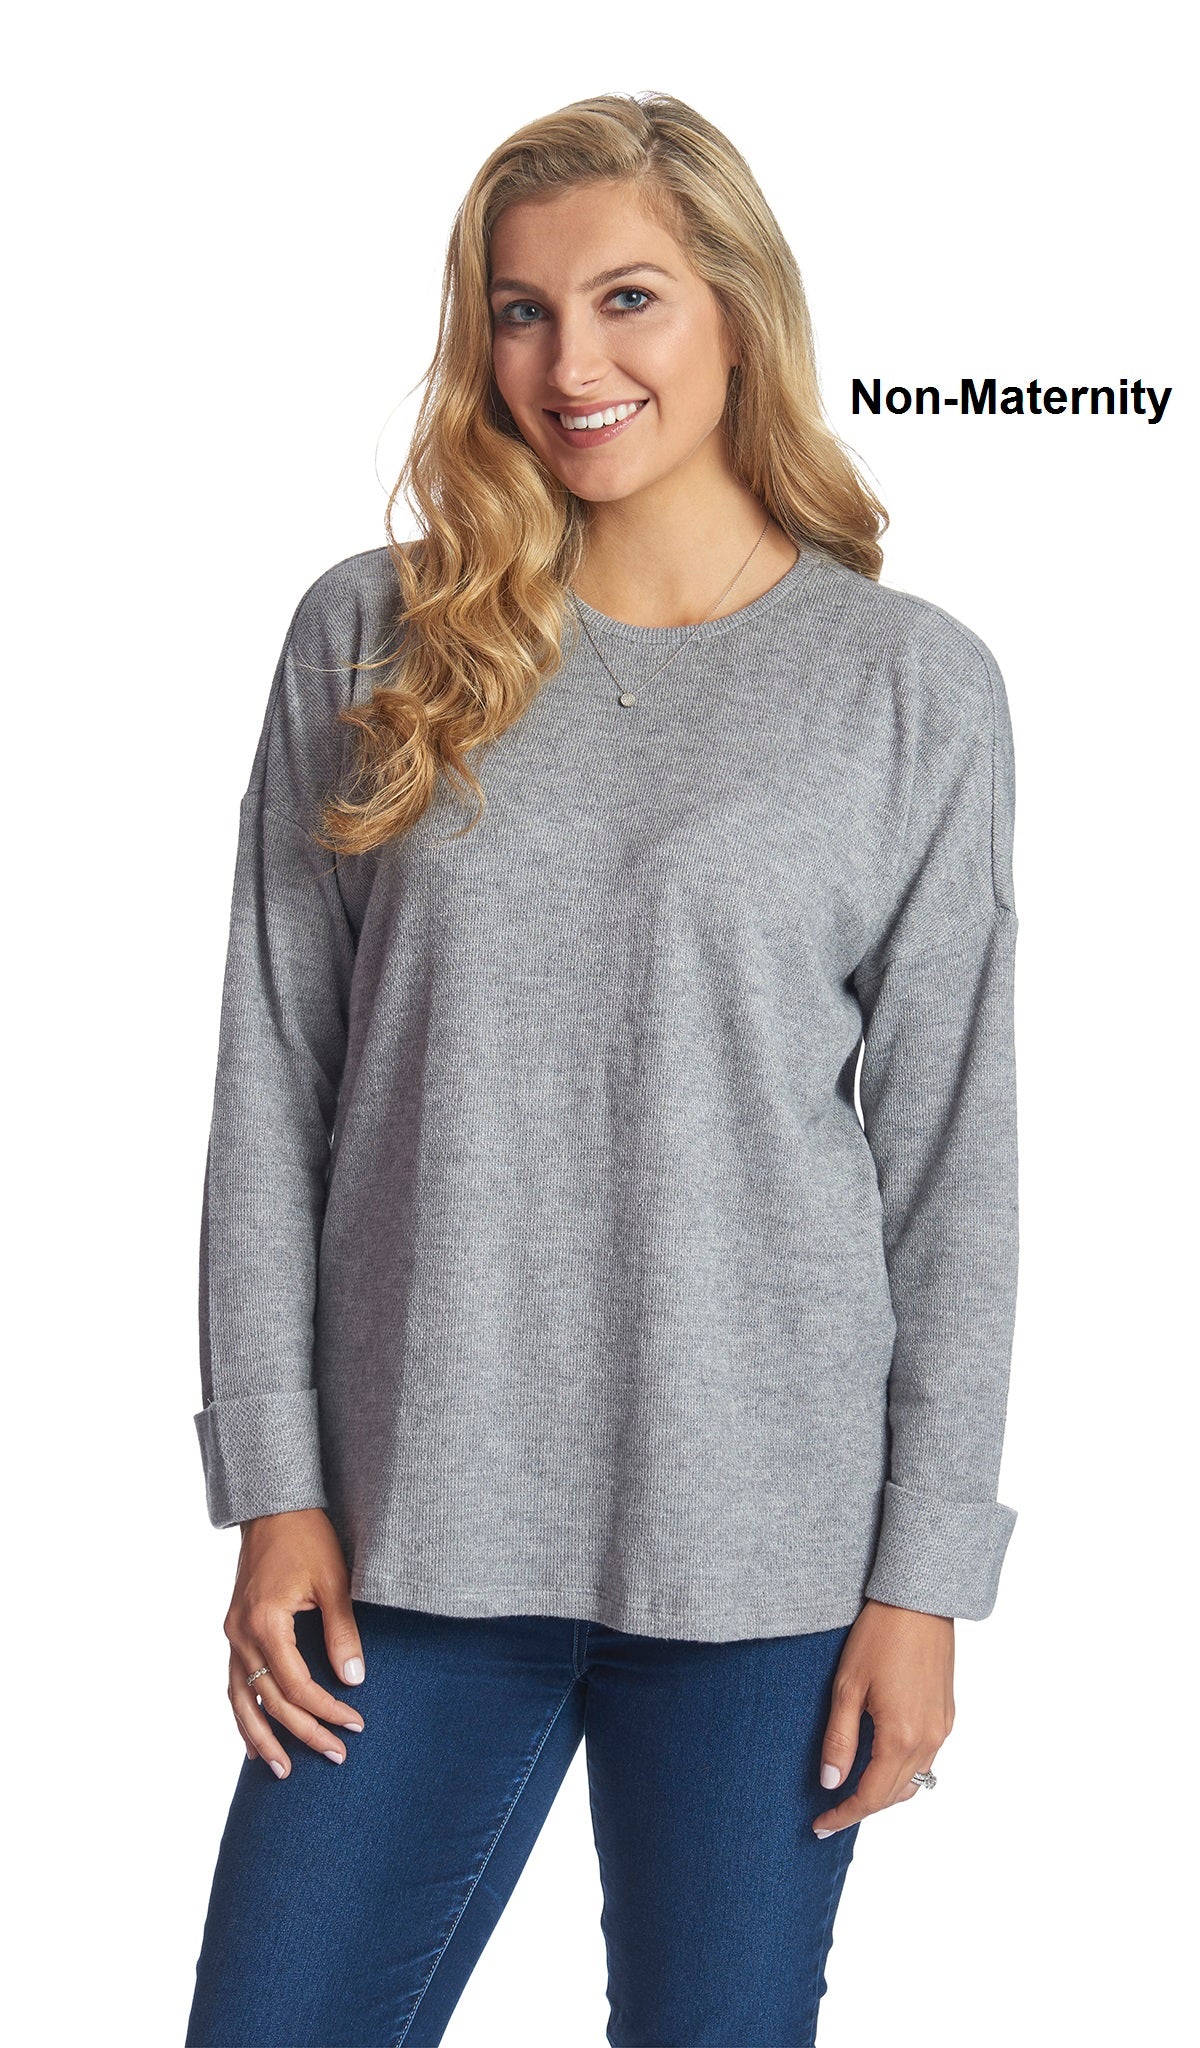 Heather Grey Andria full length shot of sweater worn by woman as non-maternity style with medium denim jeans.